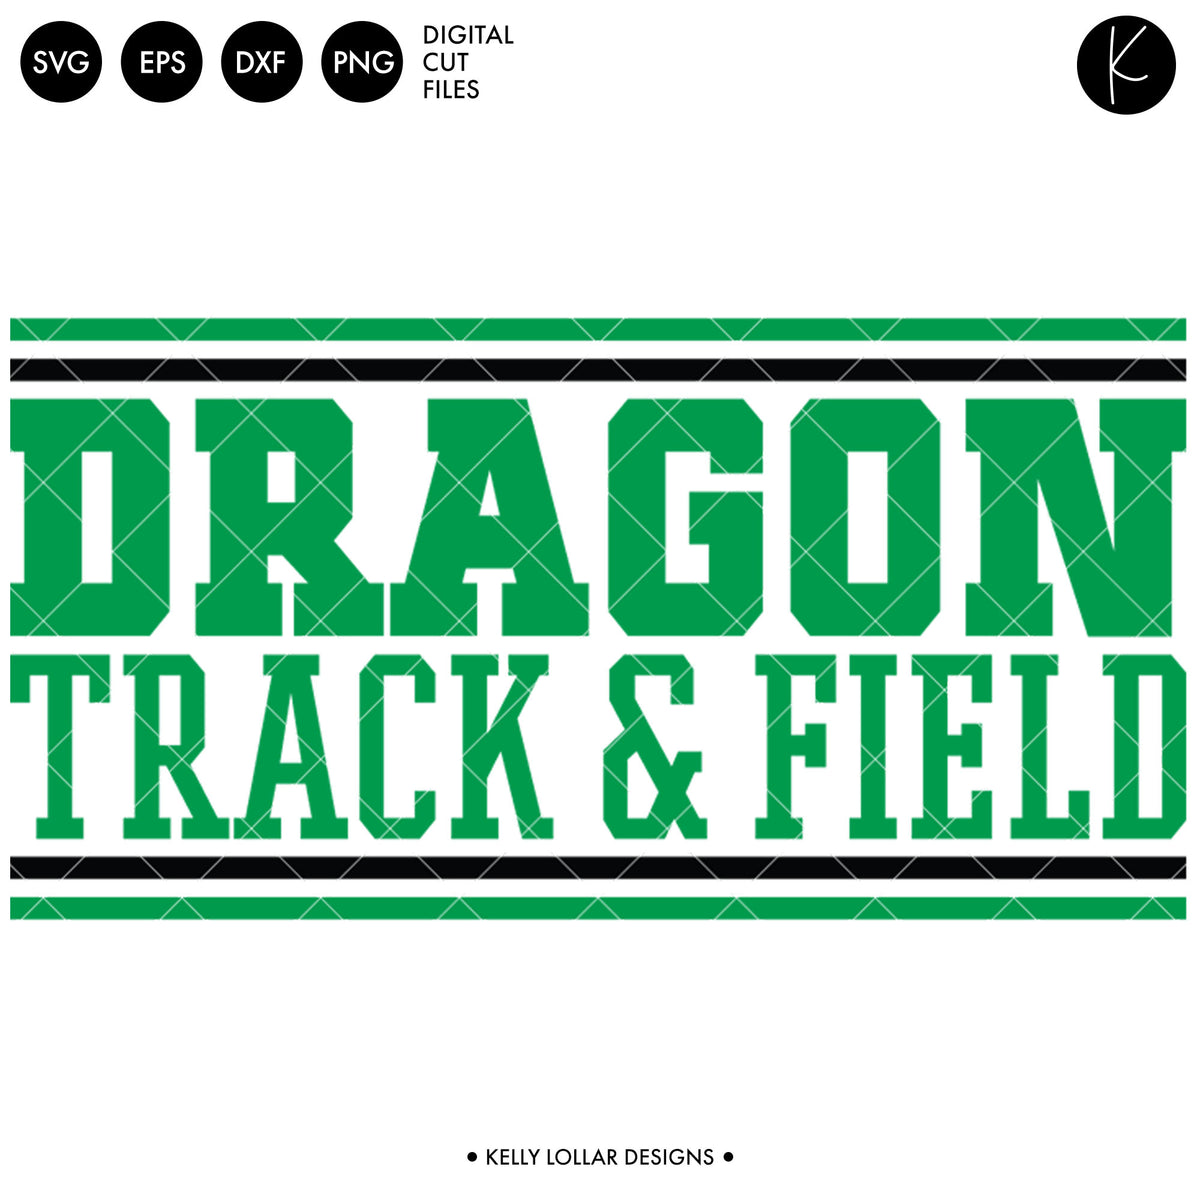 Dragons Track &amp; Field Bundle | SVG DXF EPS PNG Cut Files